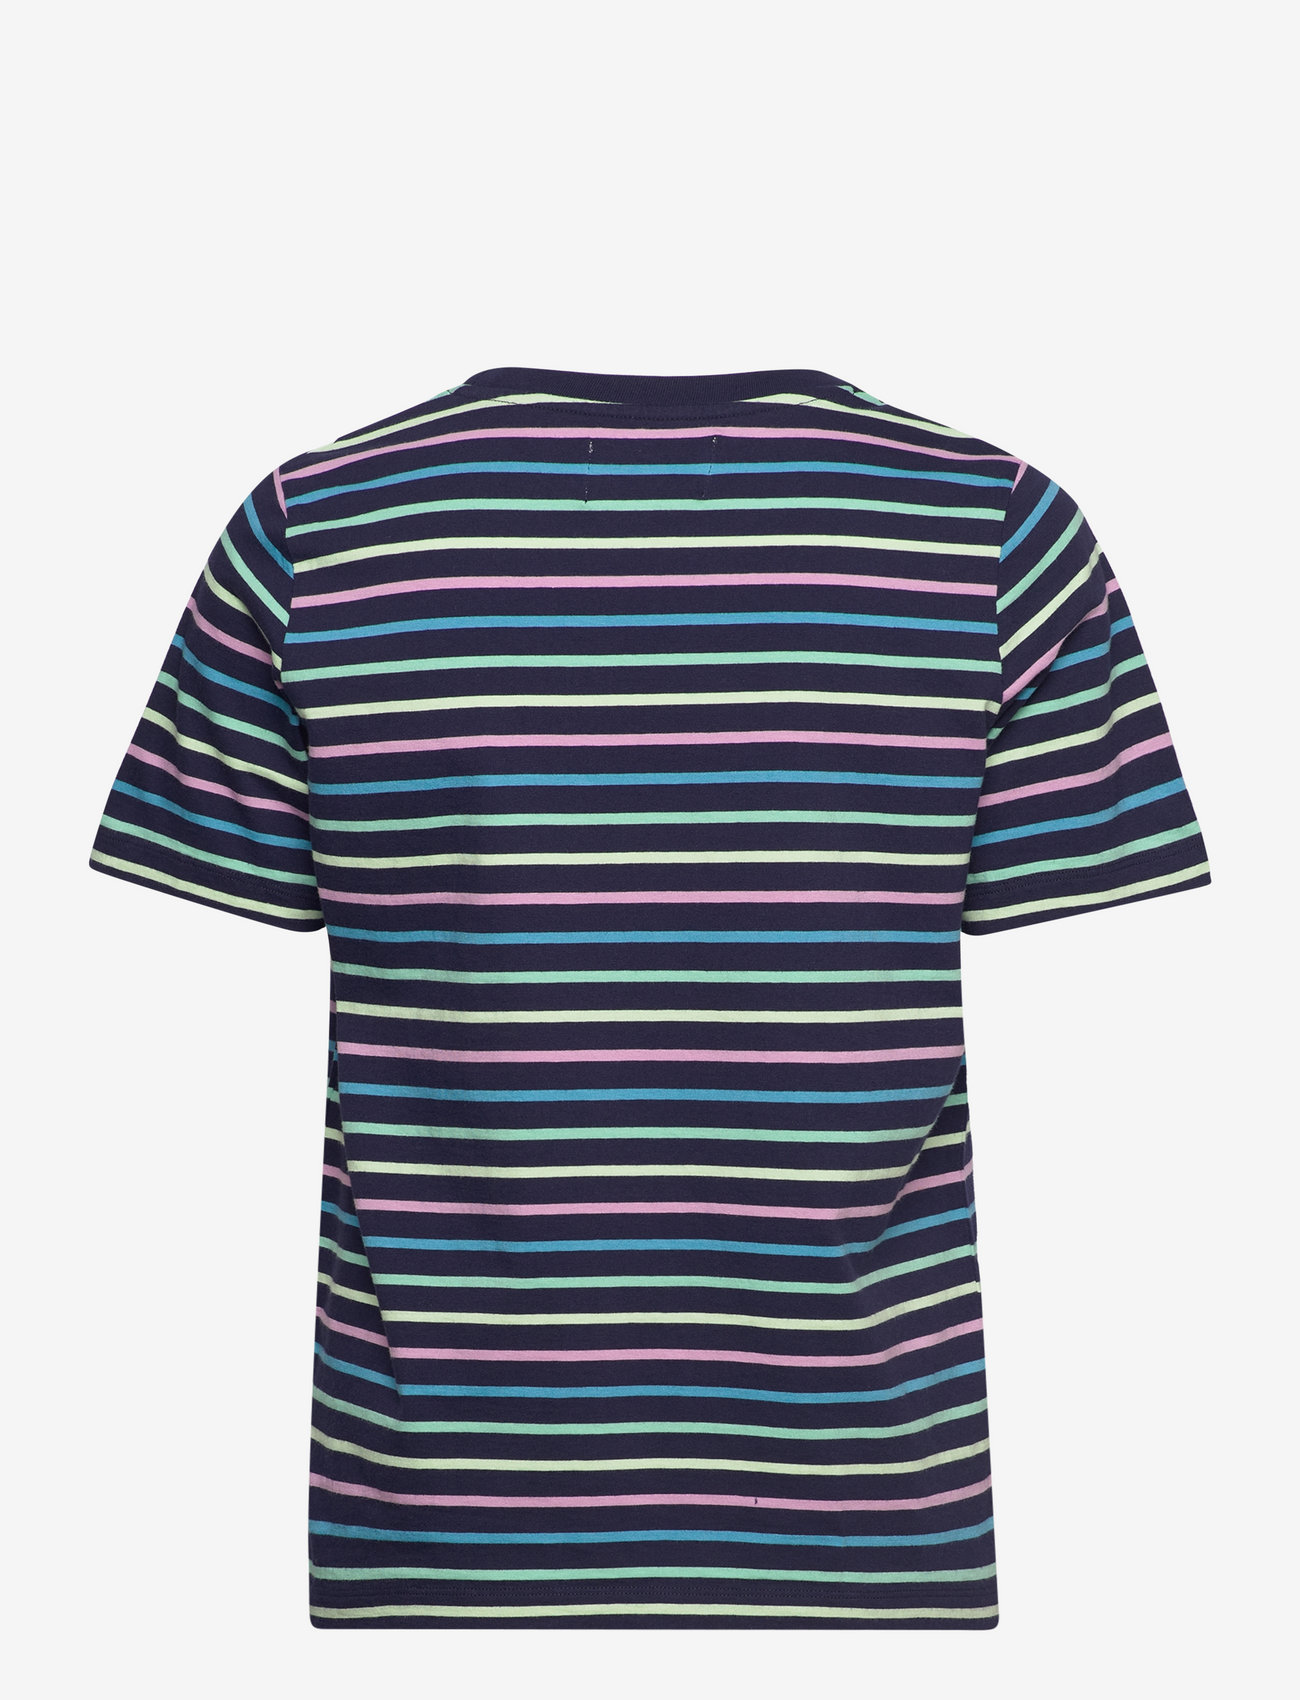 Double A by Wood Wood - Mia stripe T-shirt - t-shirt & tops - navy stripes - 1